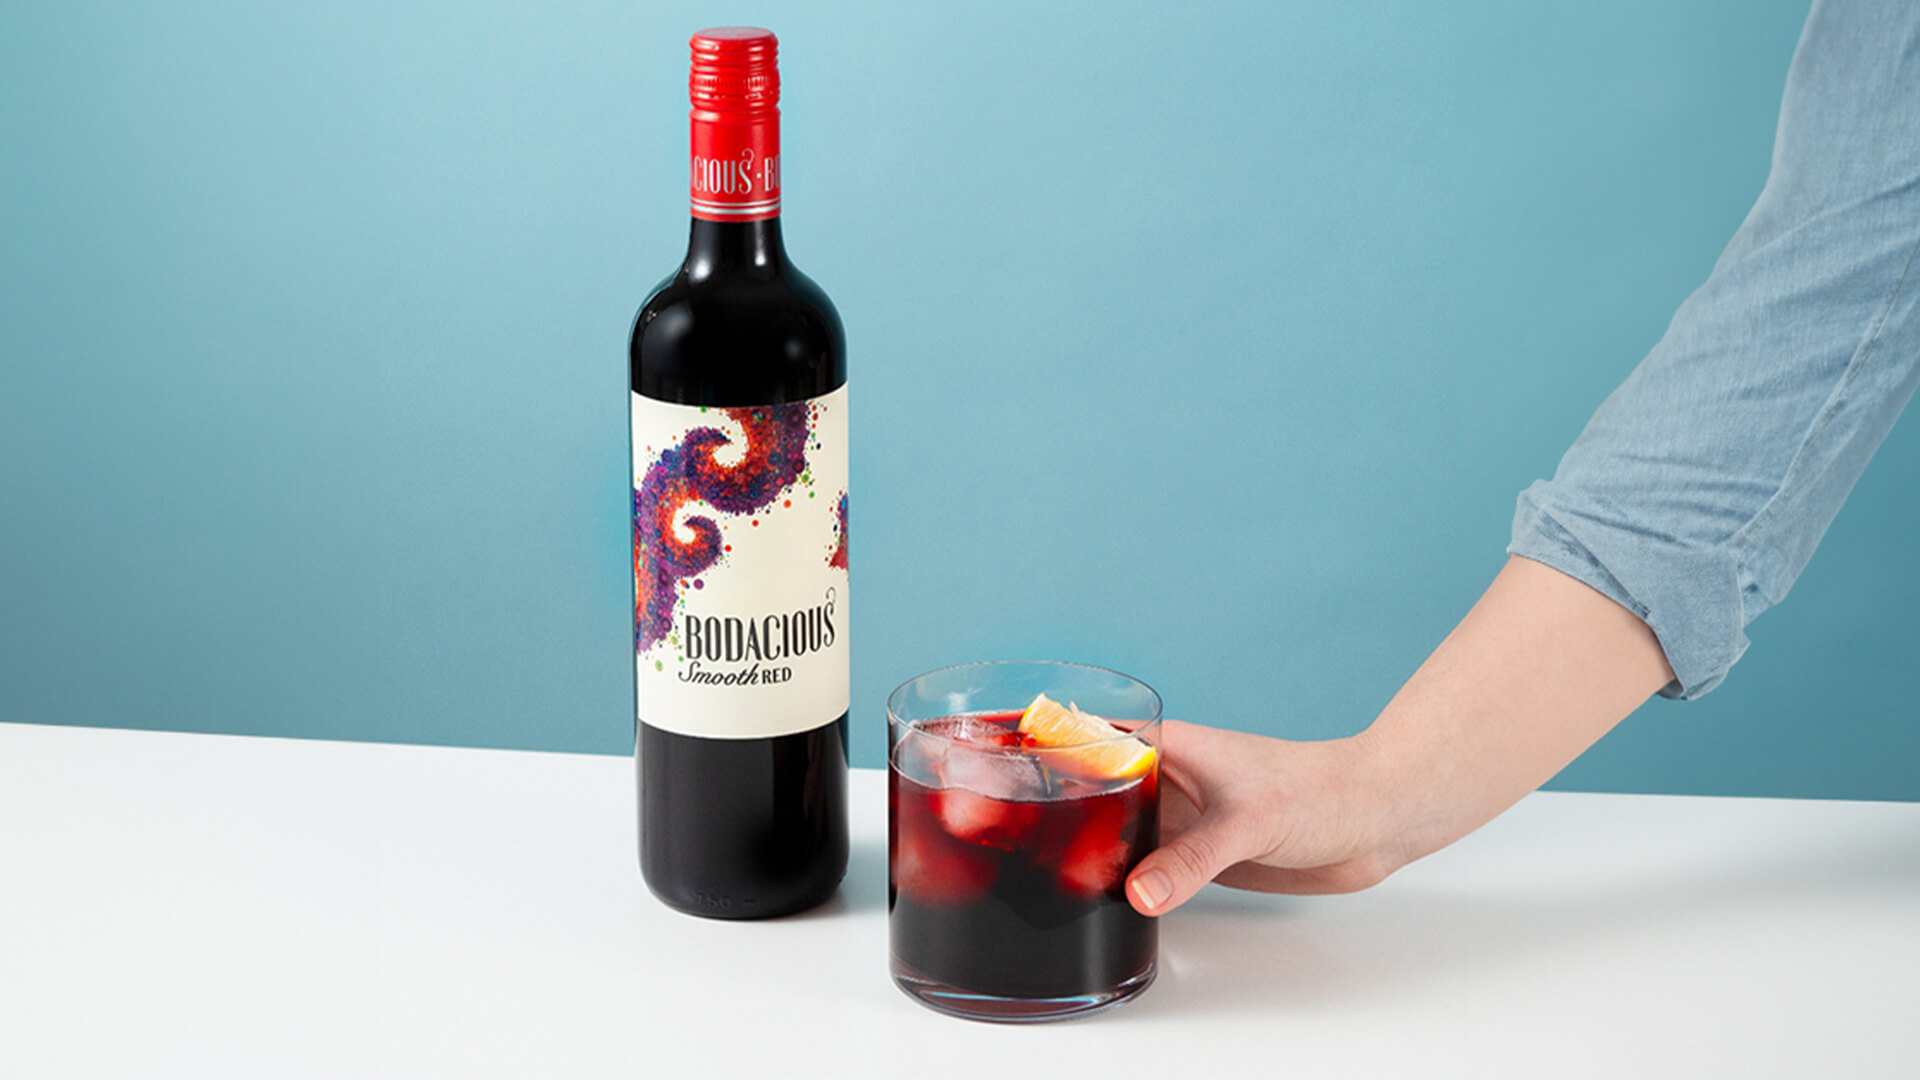 A Kalimotxo cocktail made with Bodacious Smooth Red.